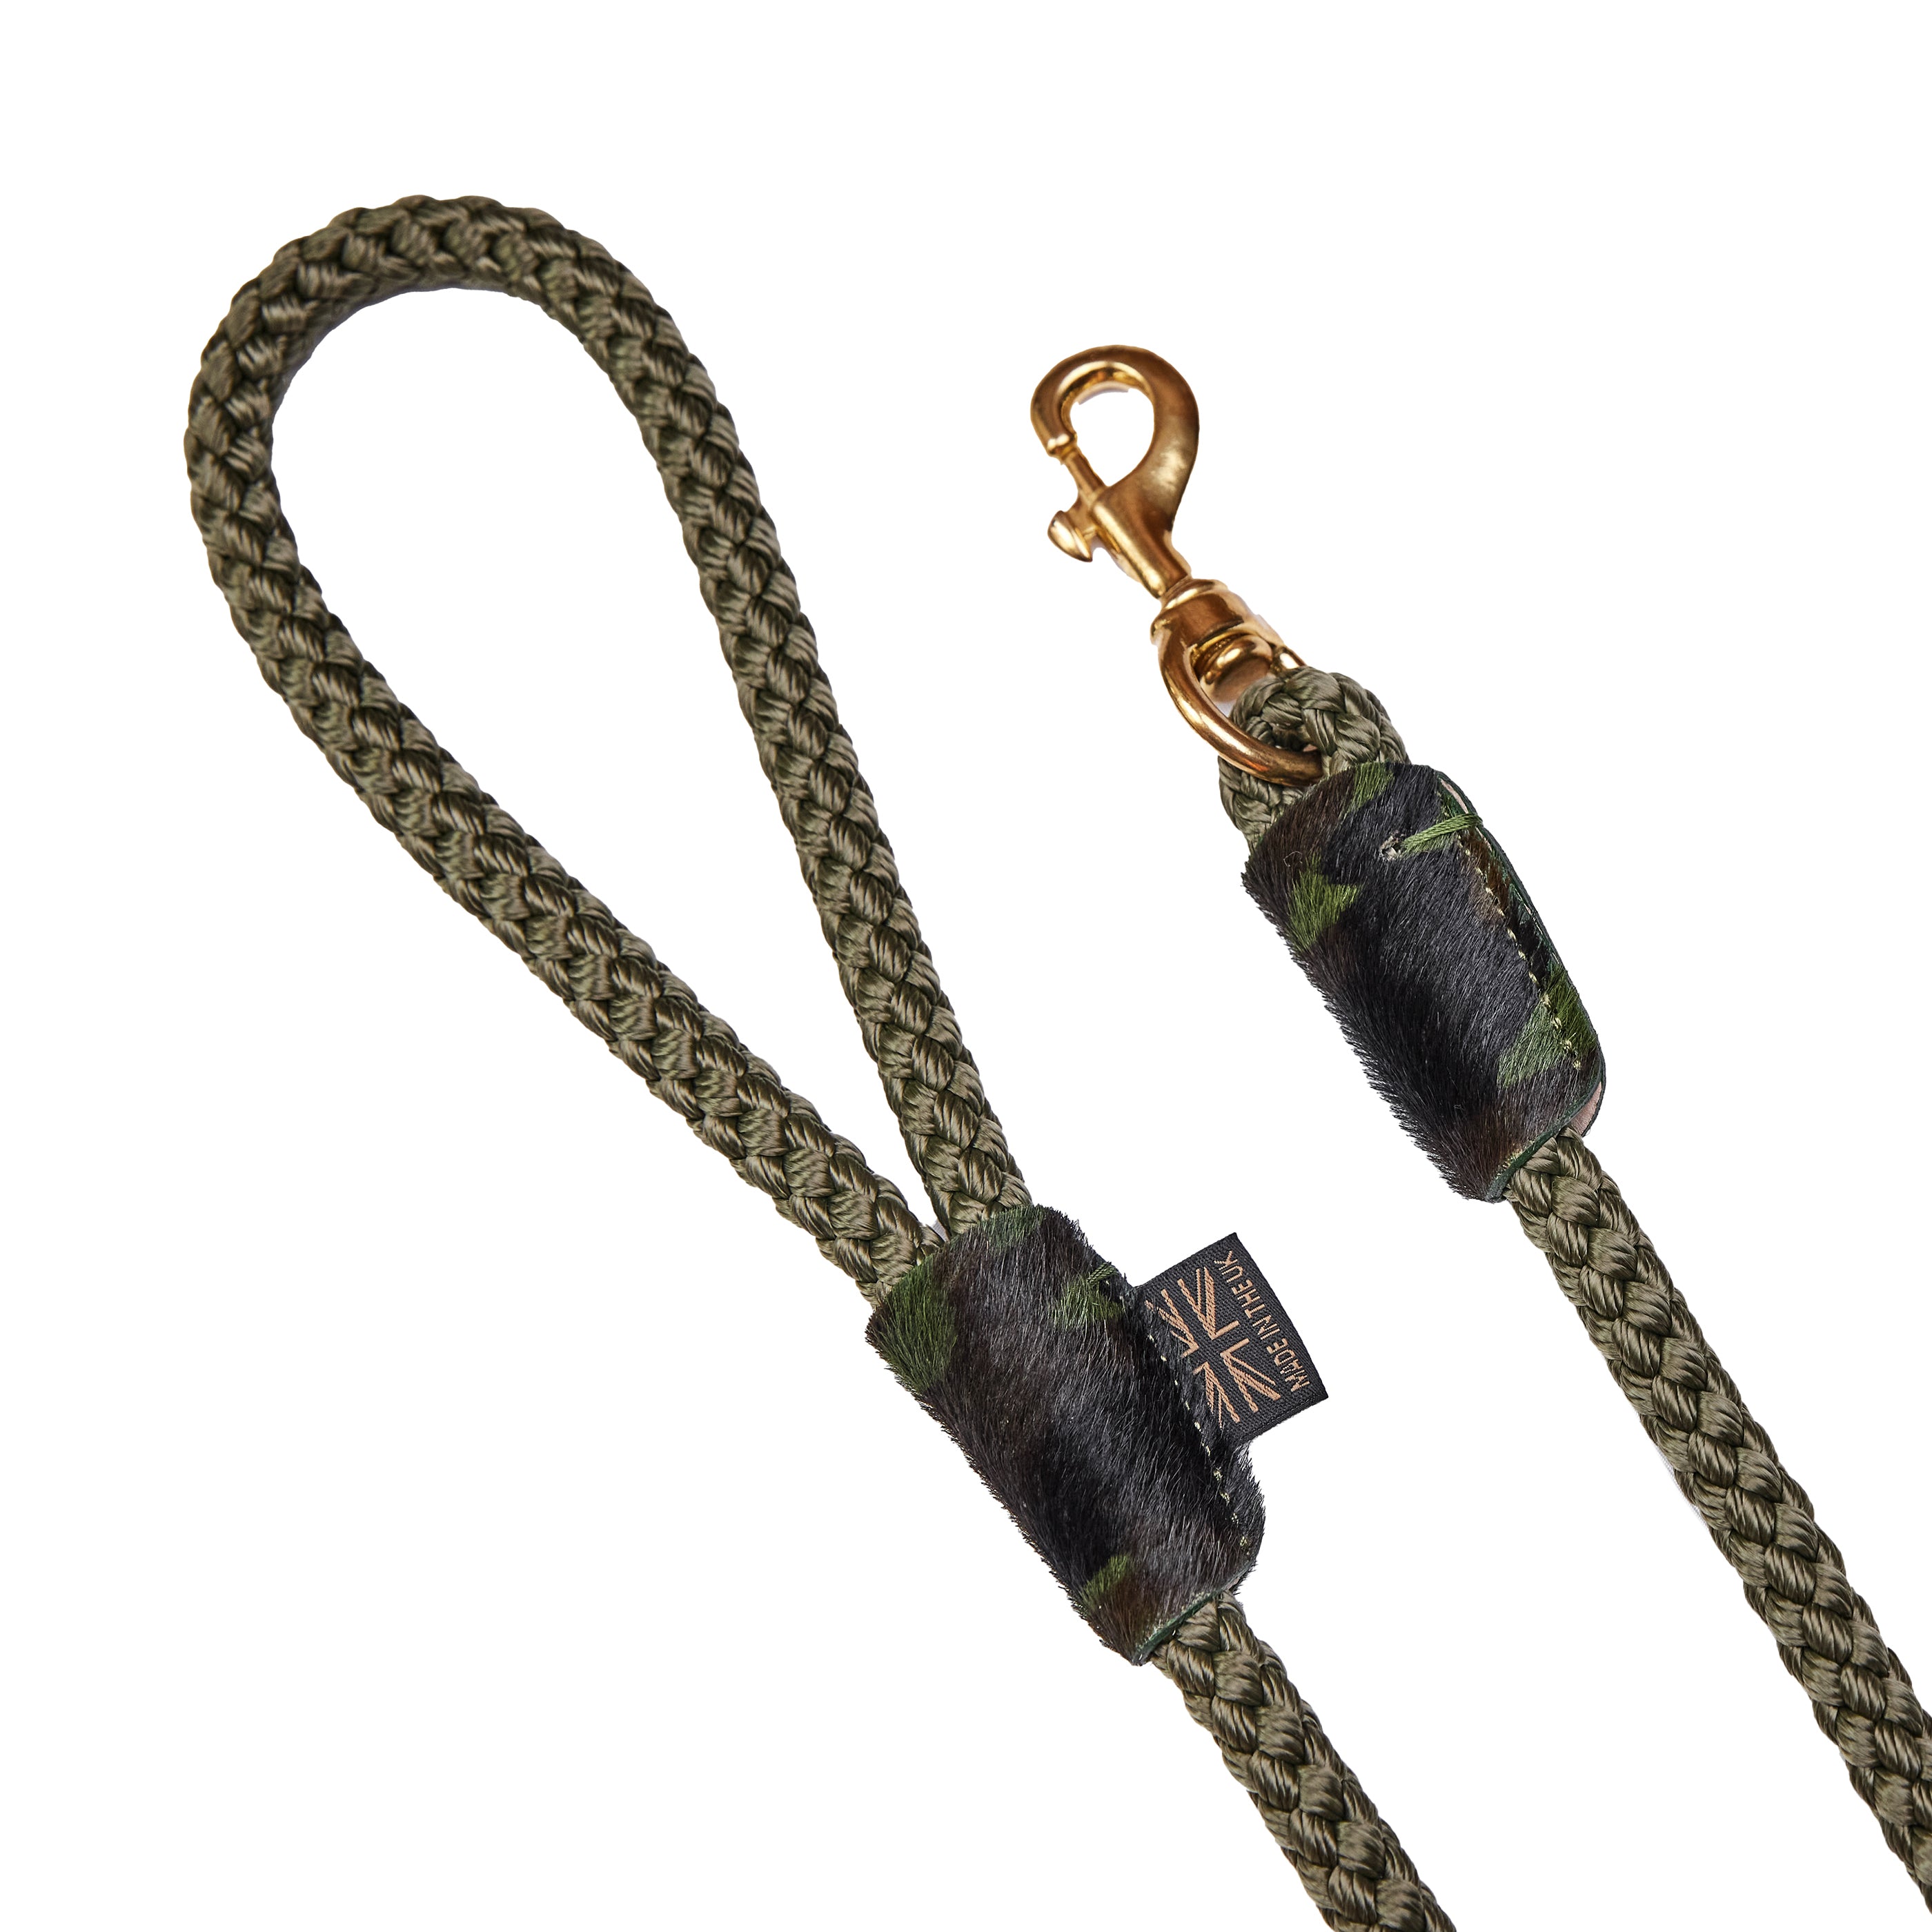 Luxury Rope And Leather Camo Clip Lead – SNUGBUMS